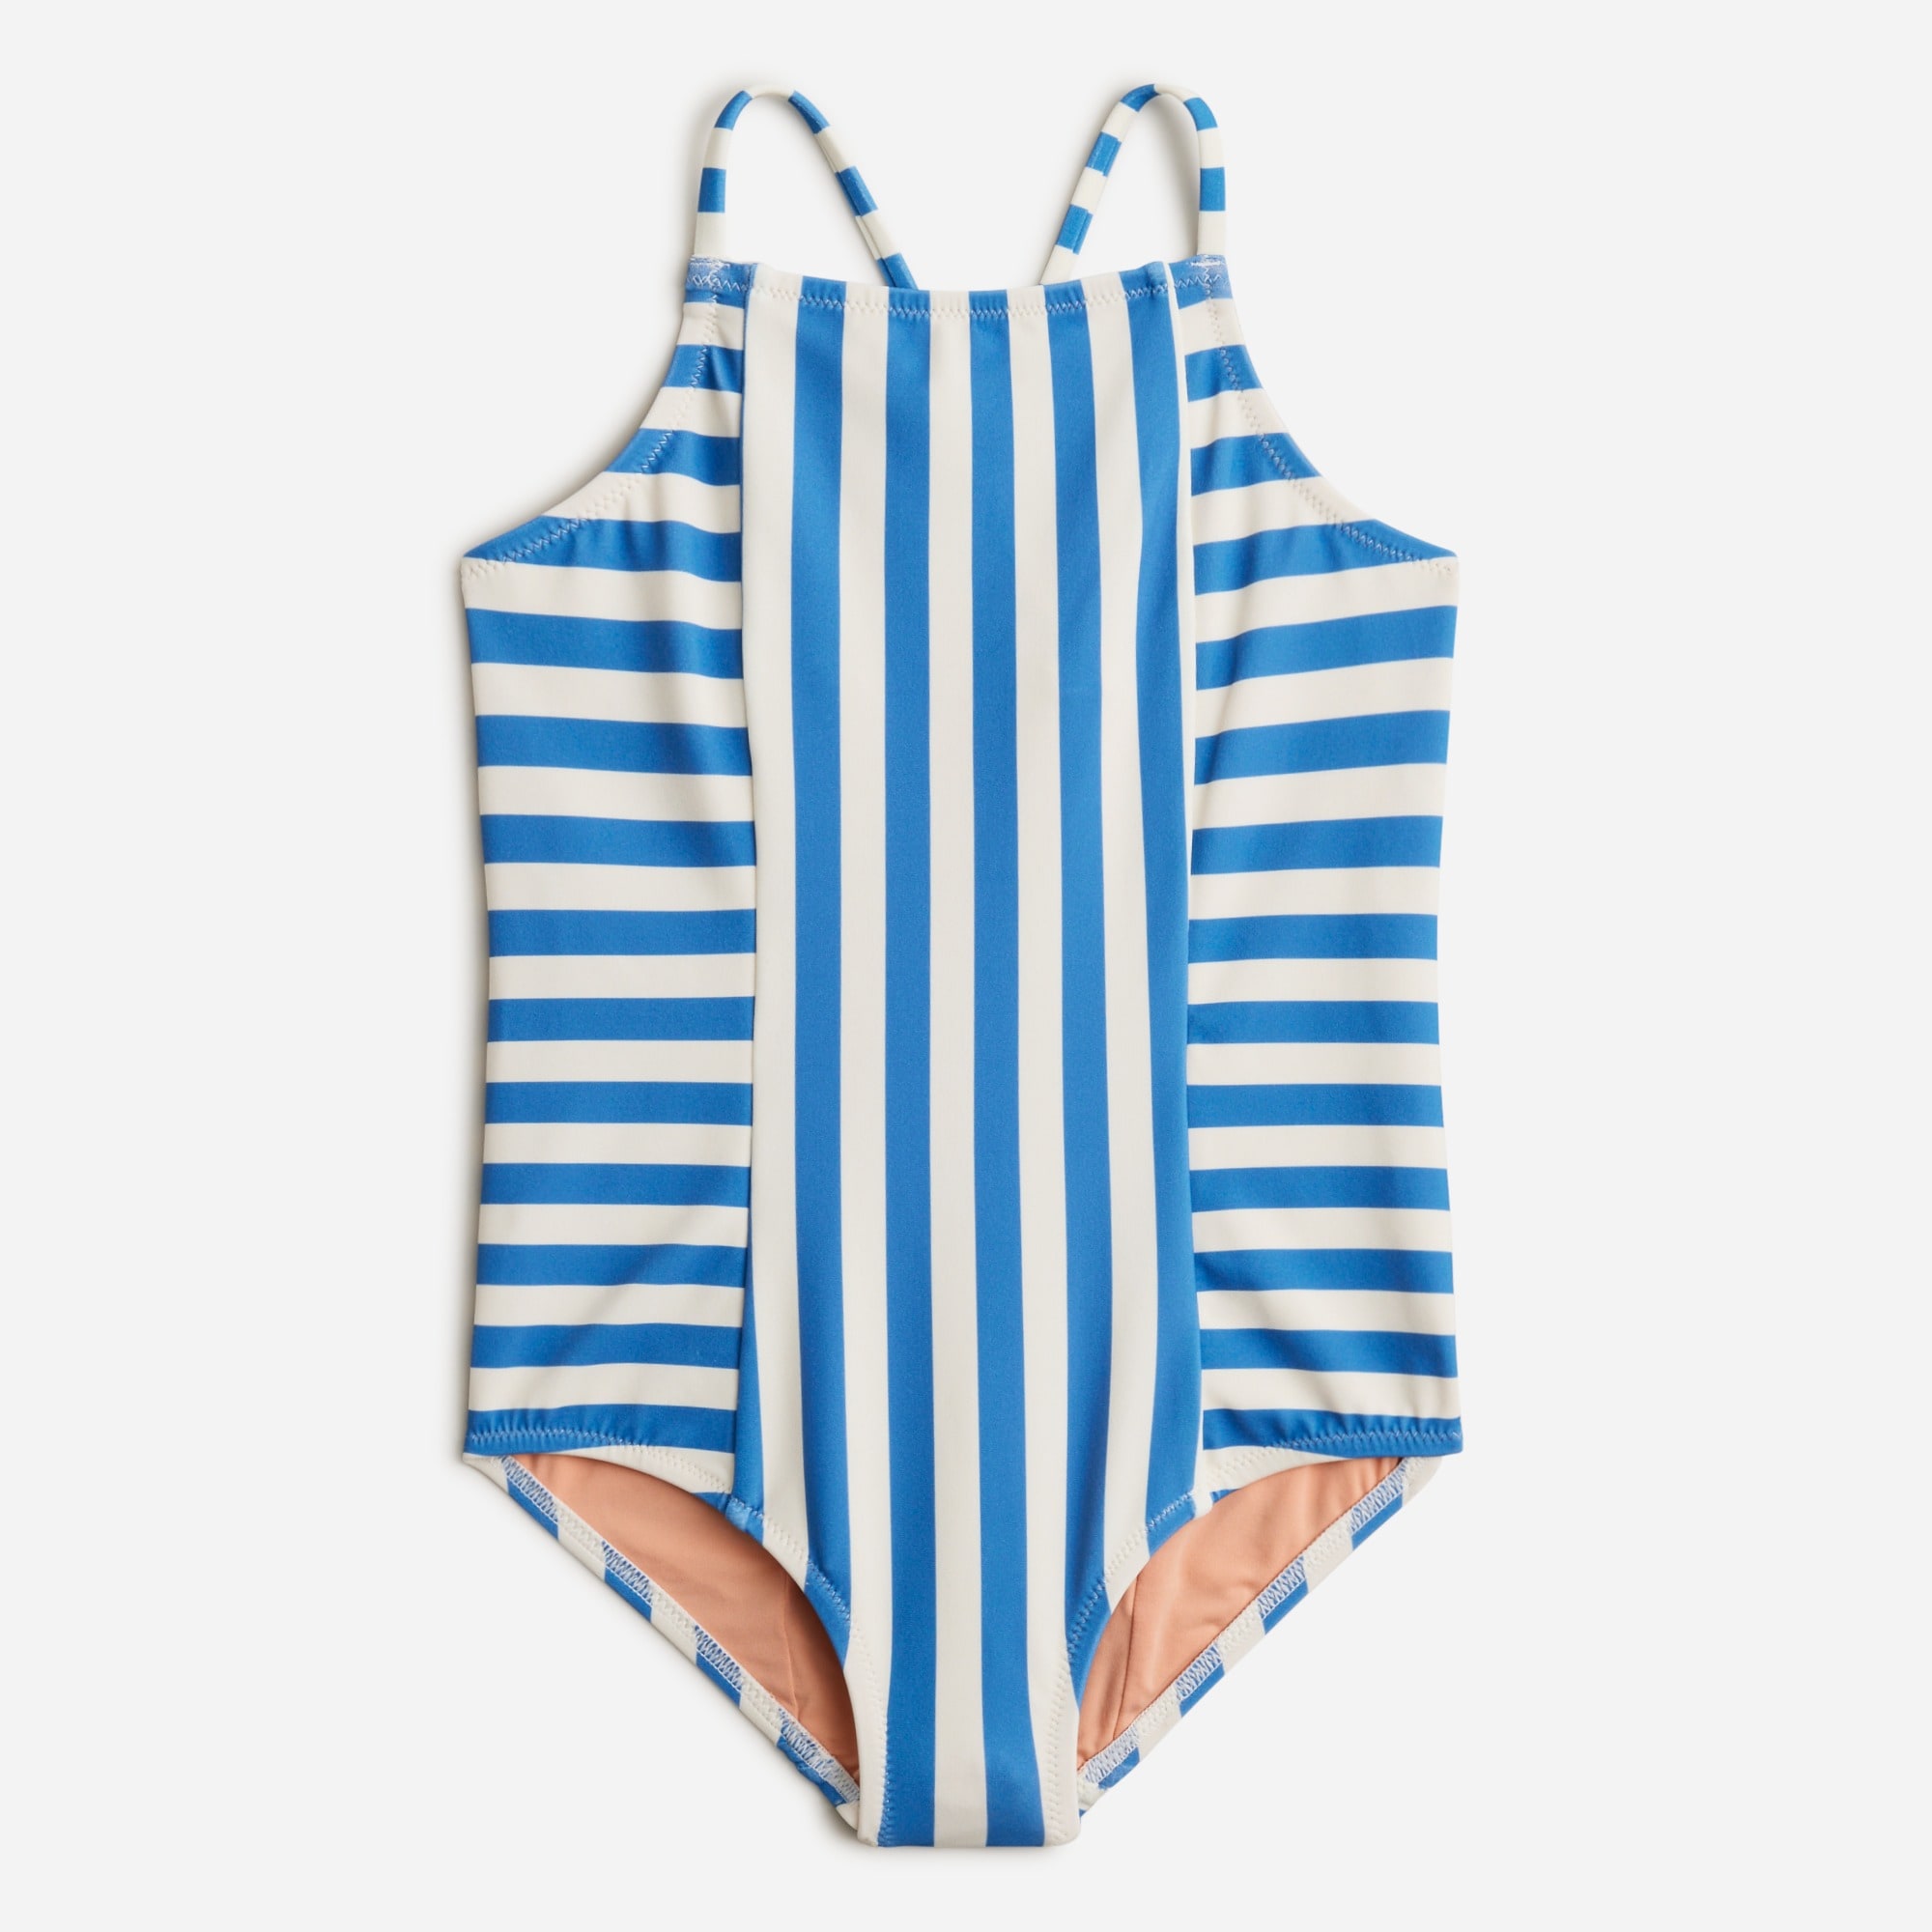  Girls' paneled one-piece swimsuit with UPF 50+